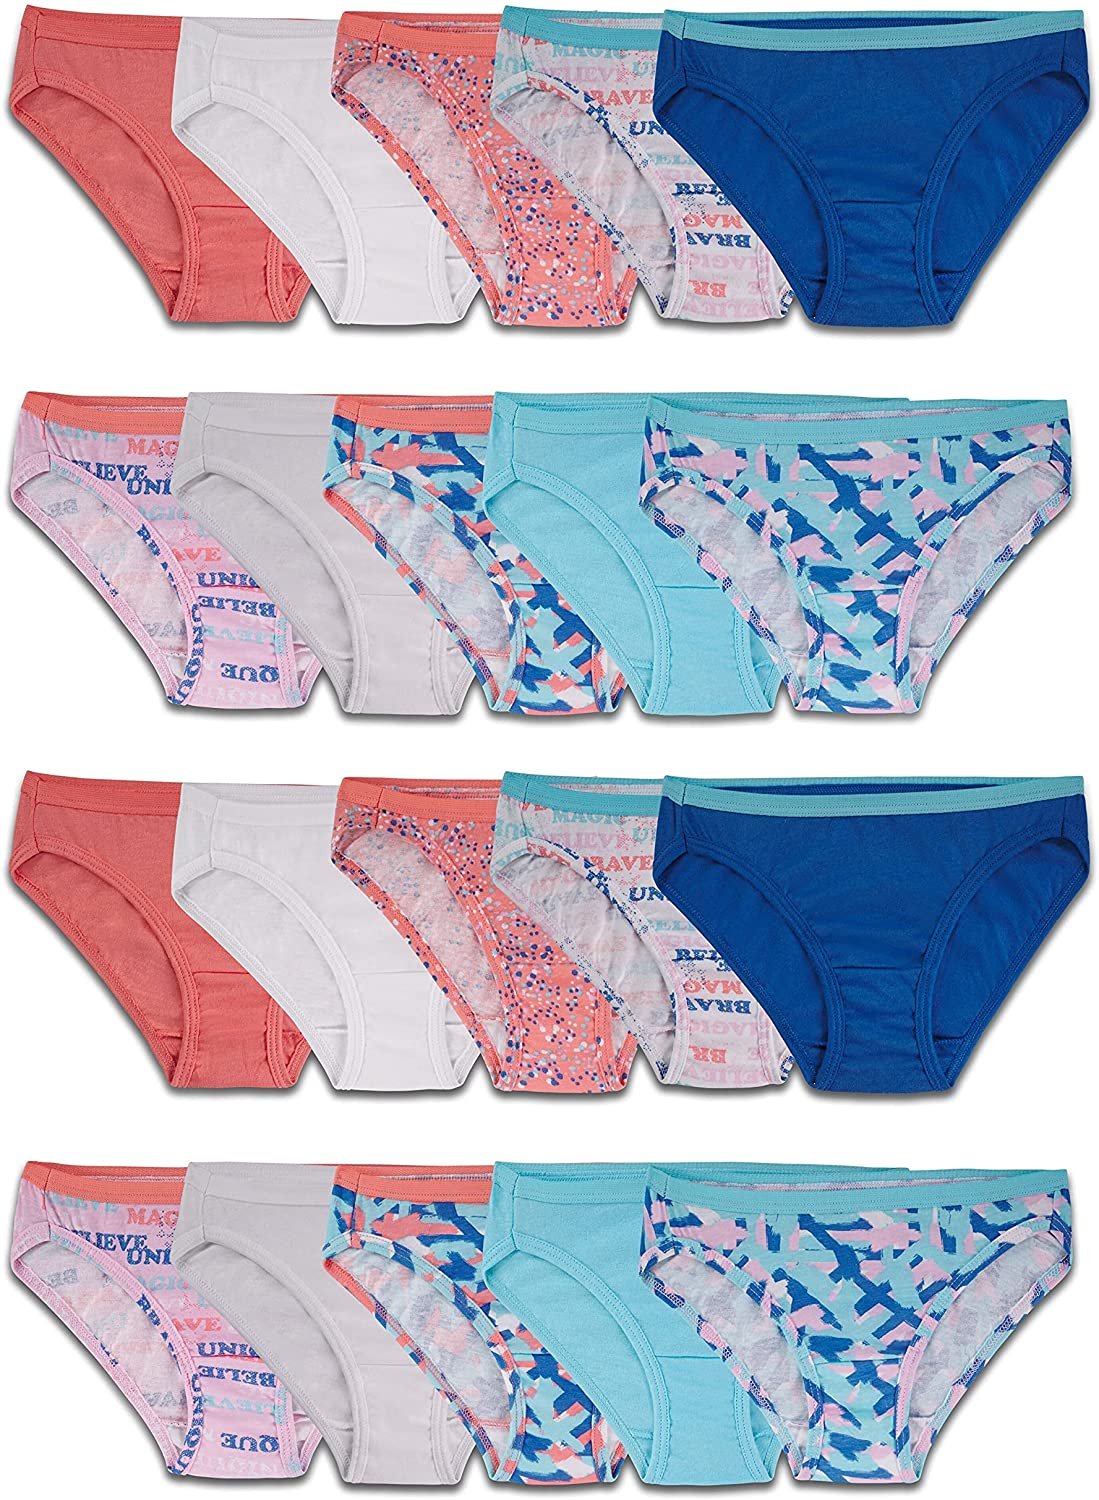  Fruit Of The Loom Girls Tag Free Cotton Brief Underwear  Multipacks